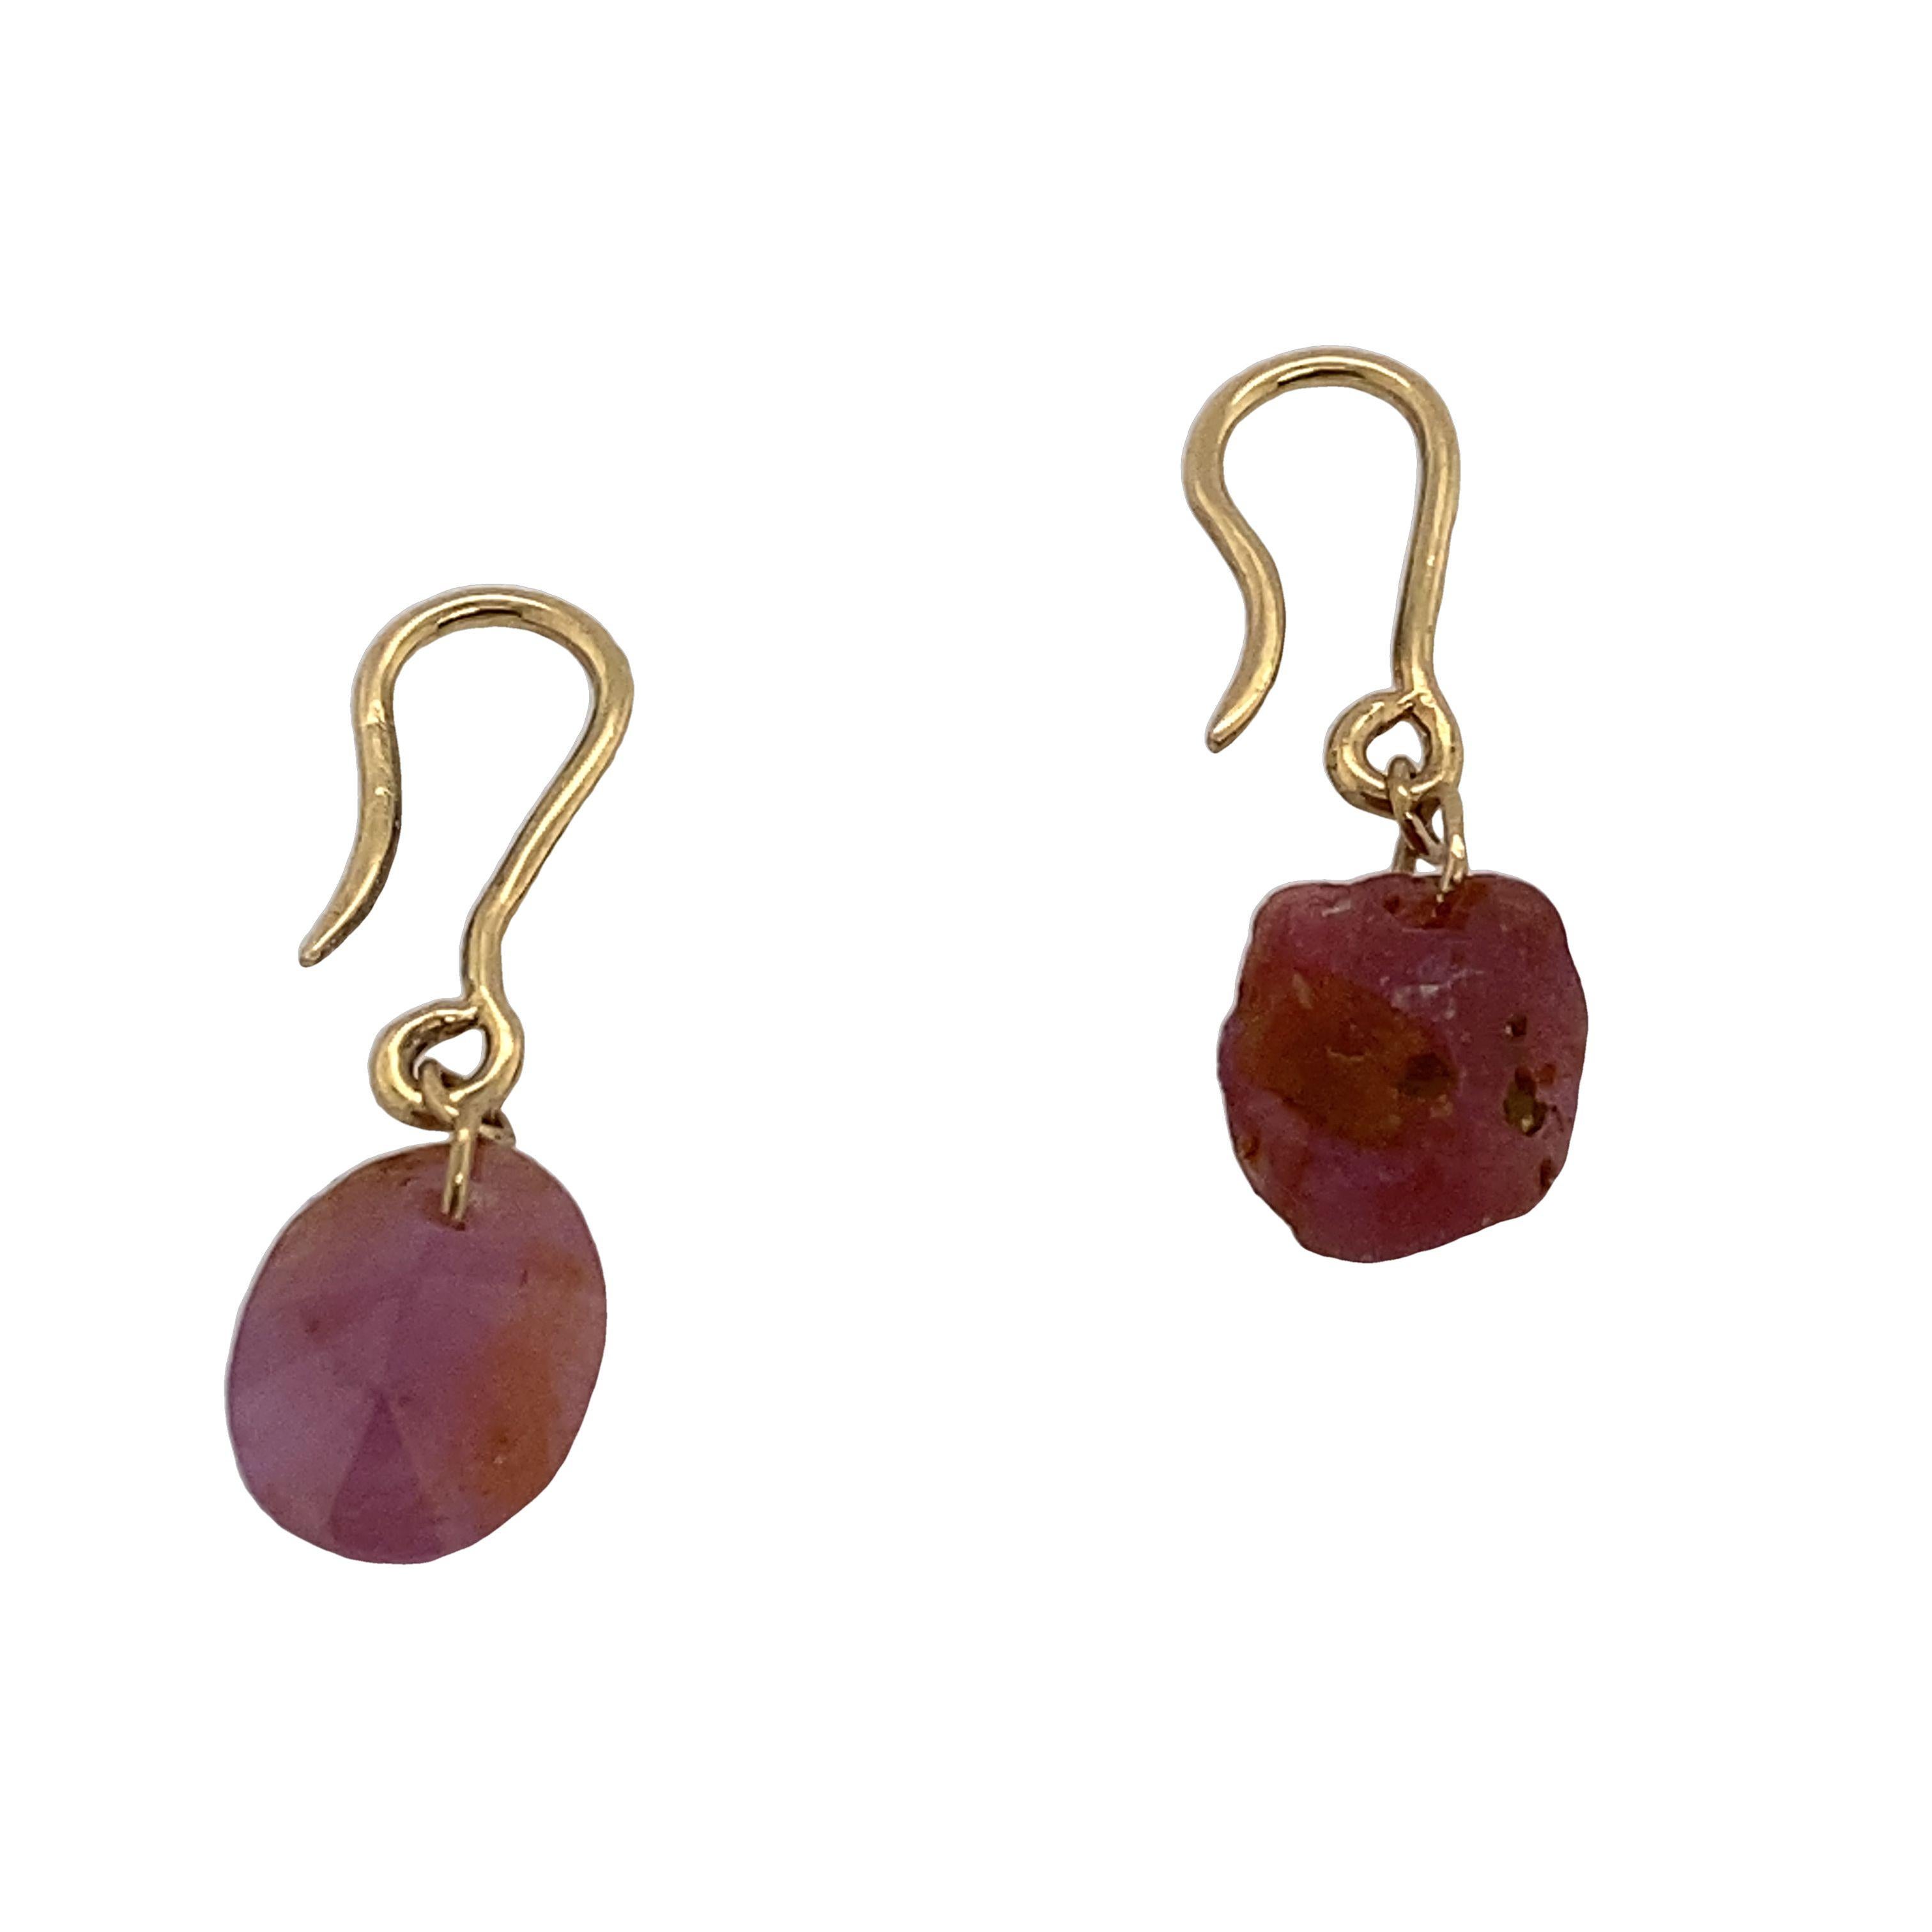 18ct Yellow Gold 3.80ct Natural Ruby Earrings on Hook Fittings

Additional Information:
Total Diamond Weight: 1.0ct
Diamond Colour: G/H
Diamond Clarity: Si
Total Weight: 4.7g
Earring Size: 20mm x 7mm
SMS4771